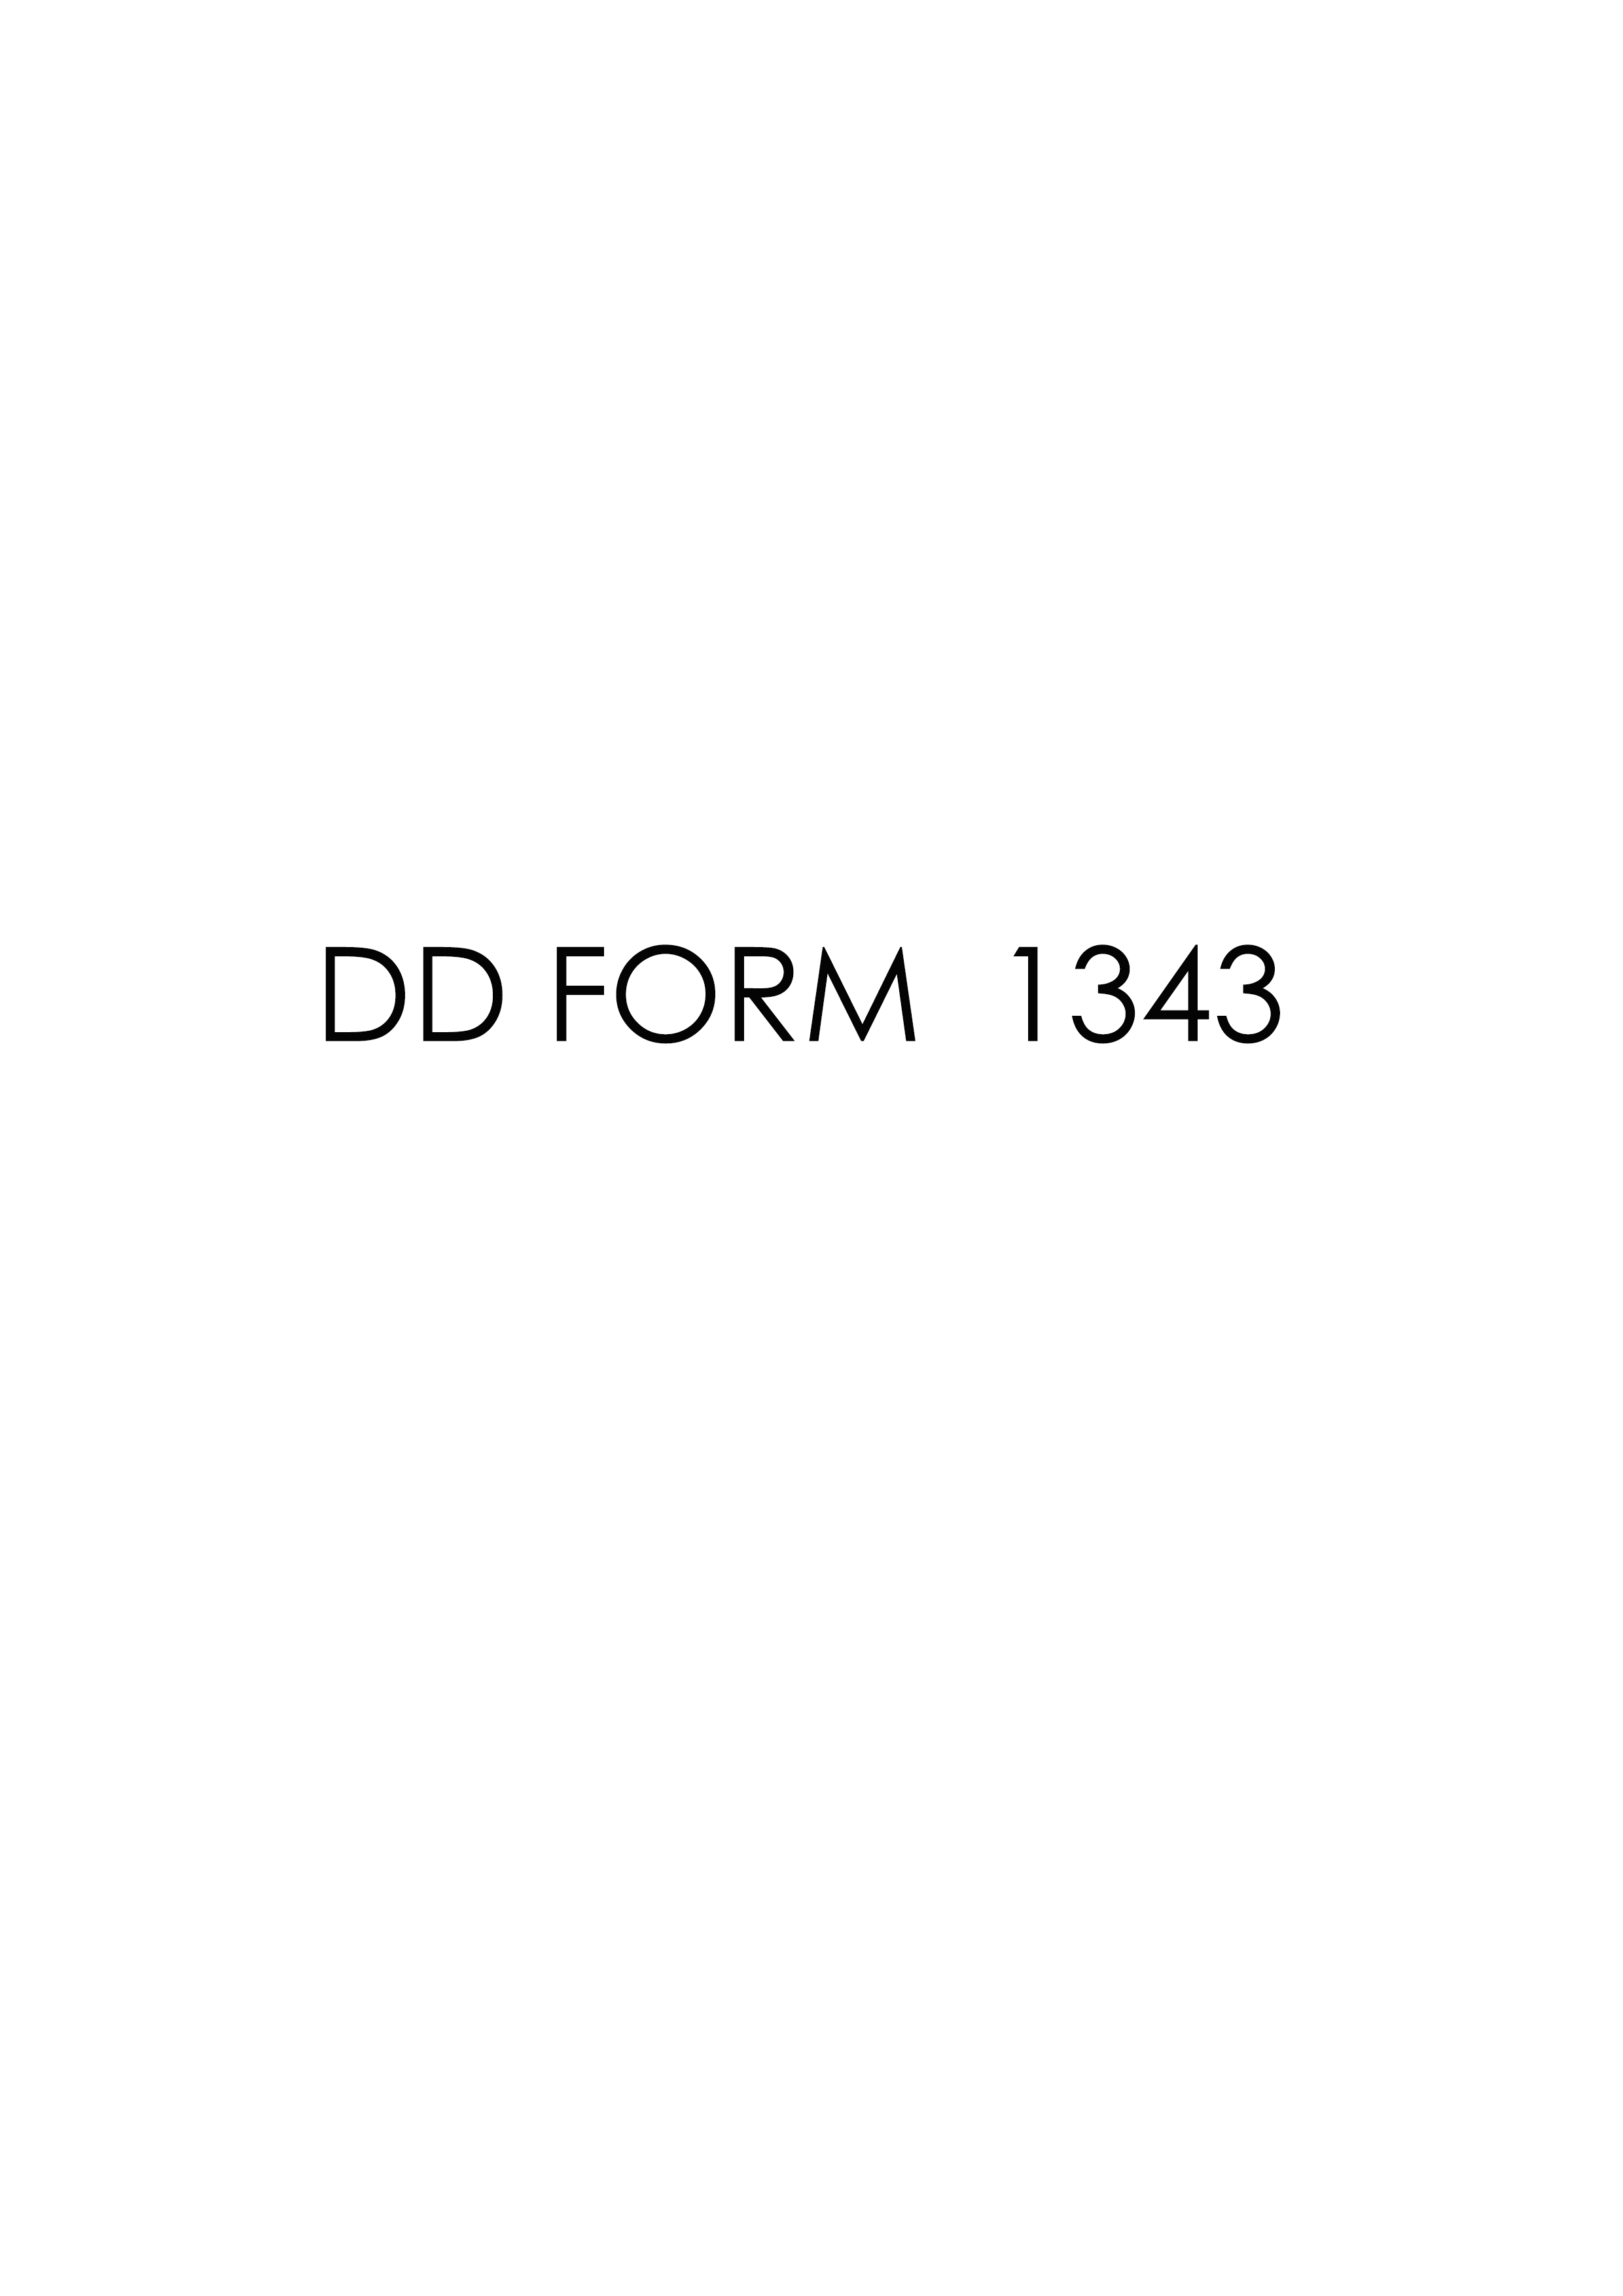 Download Fillable dd Form 1343